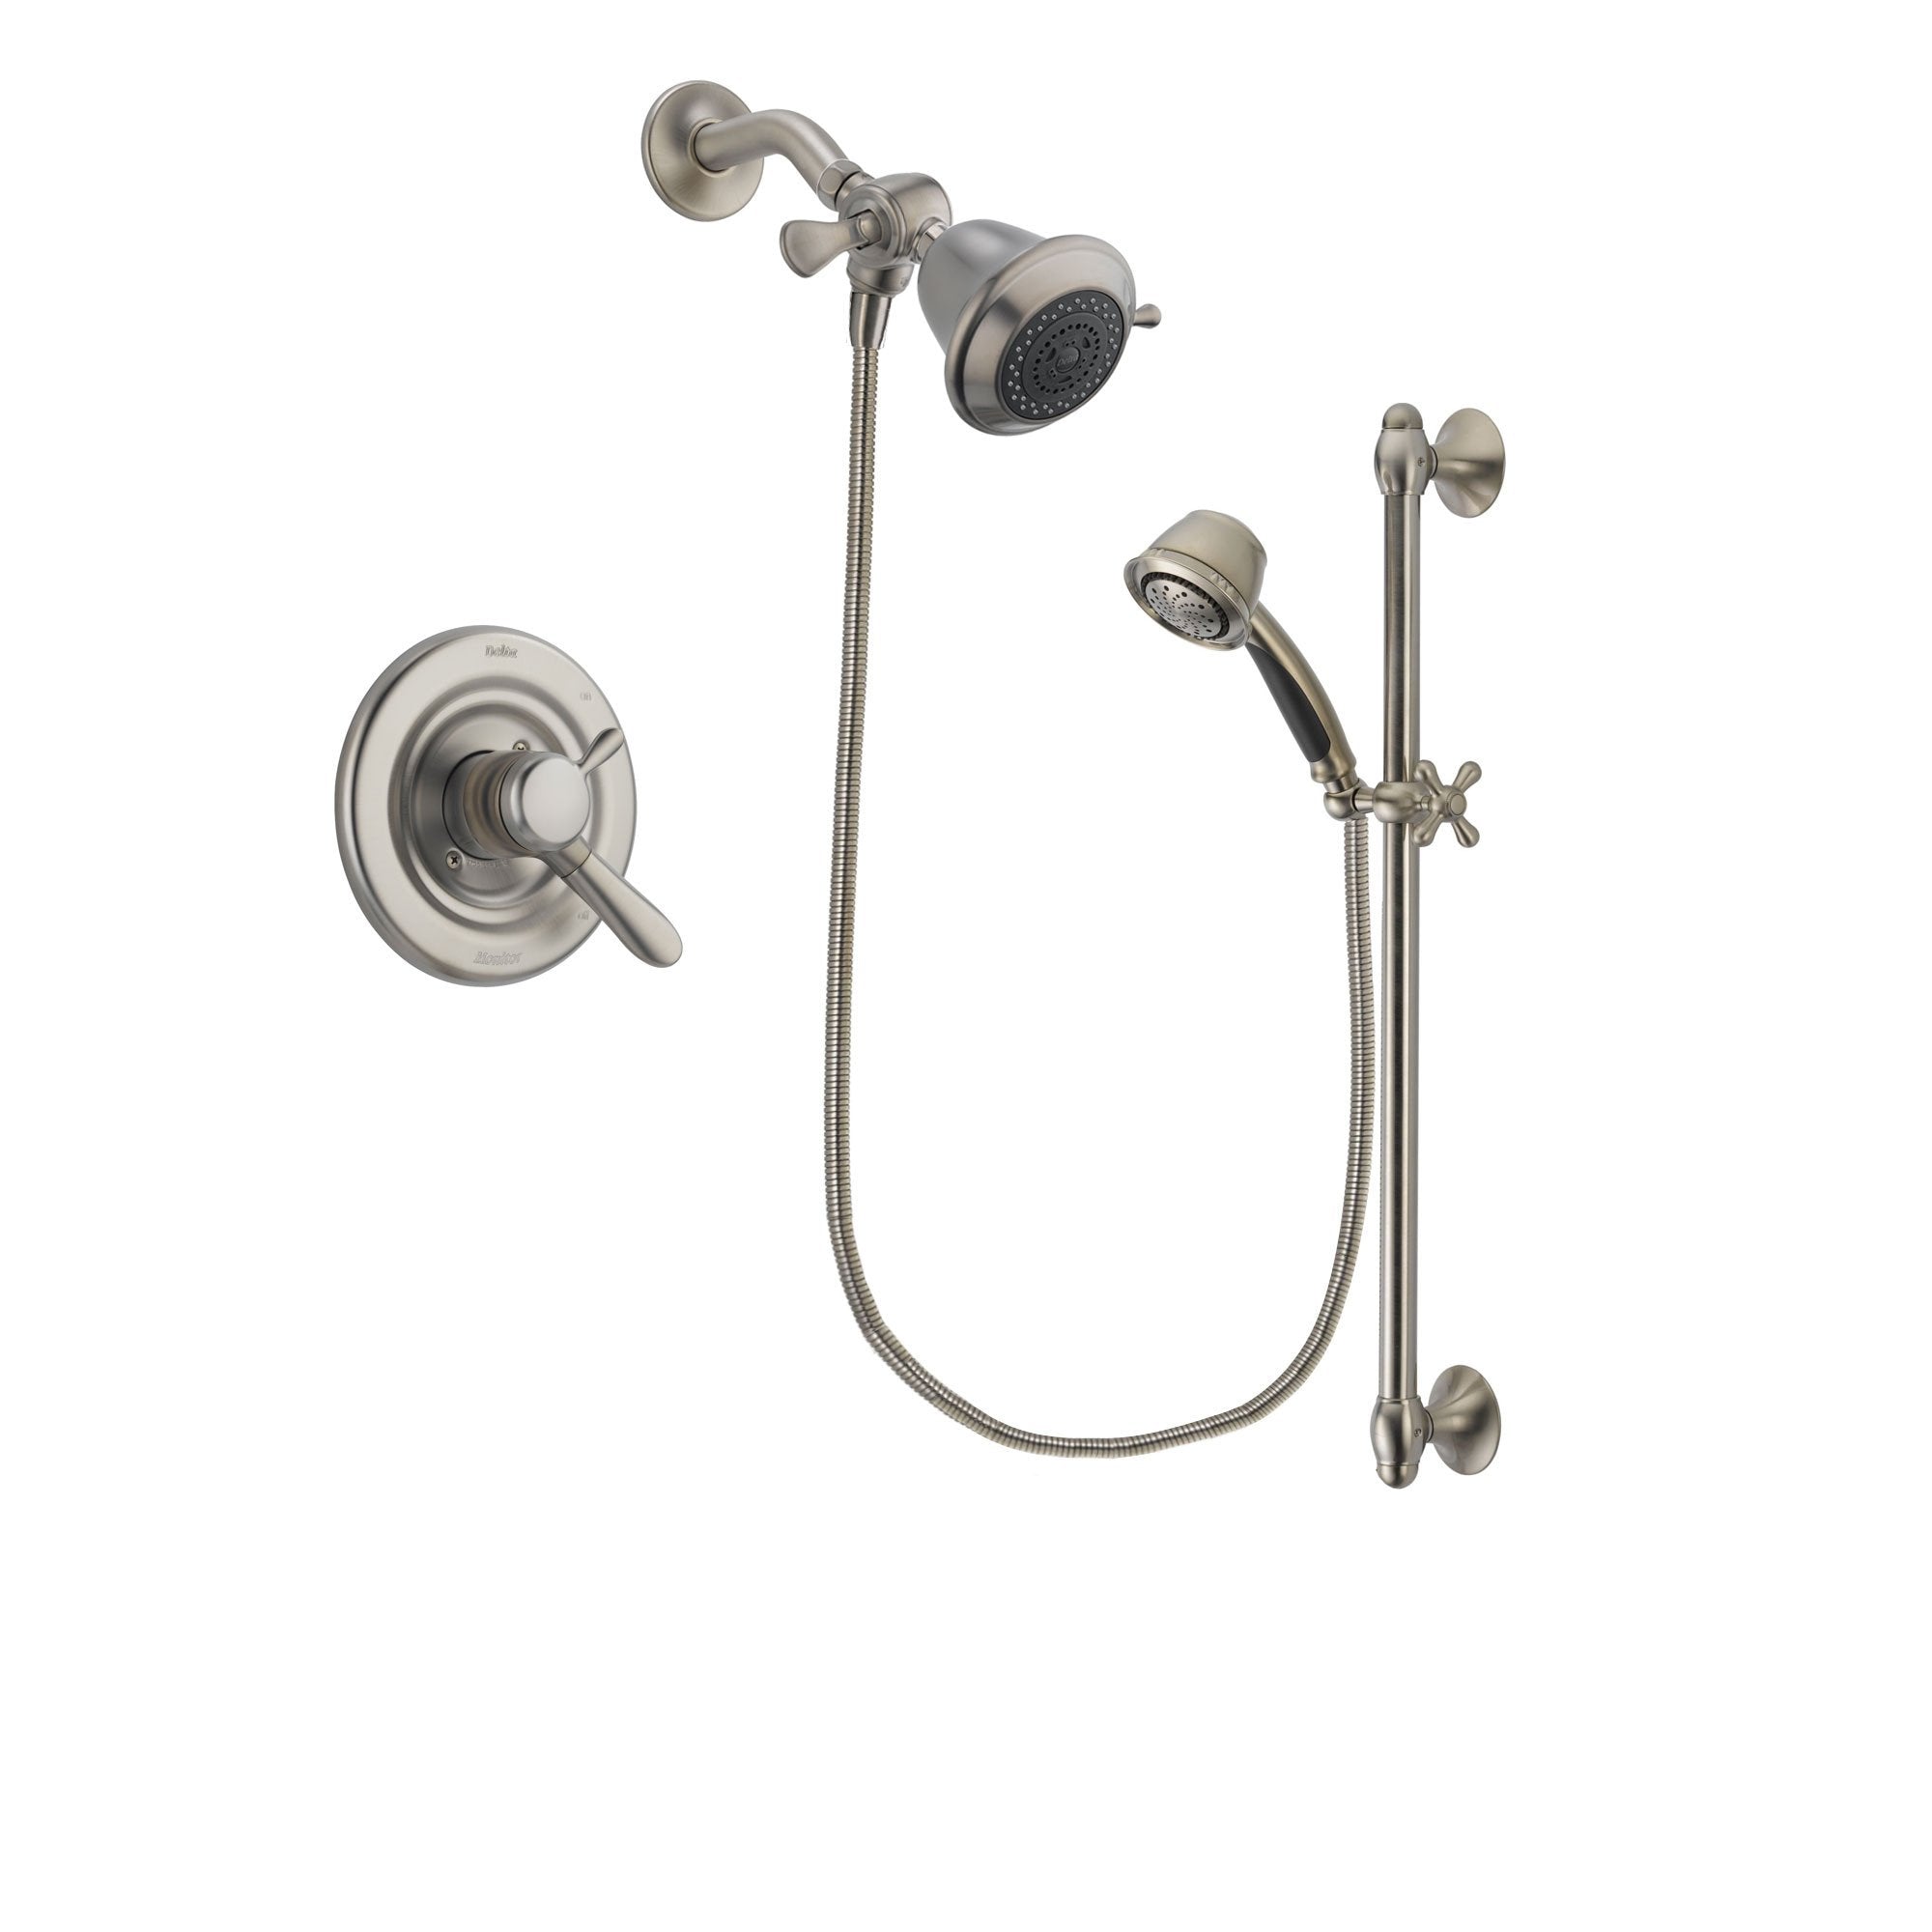 Delta Lahara Stainless Steel Finish Dual Control Shower Faucet System Package with Shower Head and 5-Spray Personal Handshower with Slide Bar Includes Rough-in Valve DSP1262V